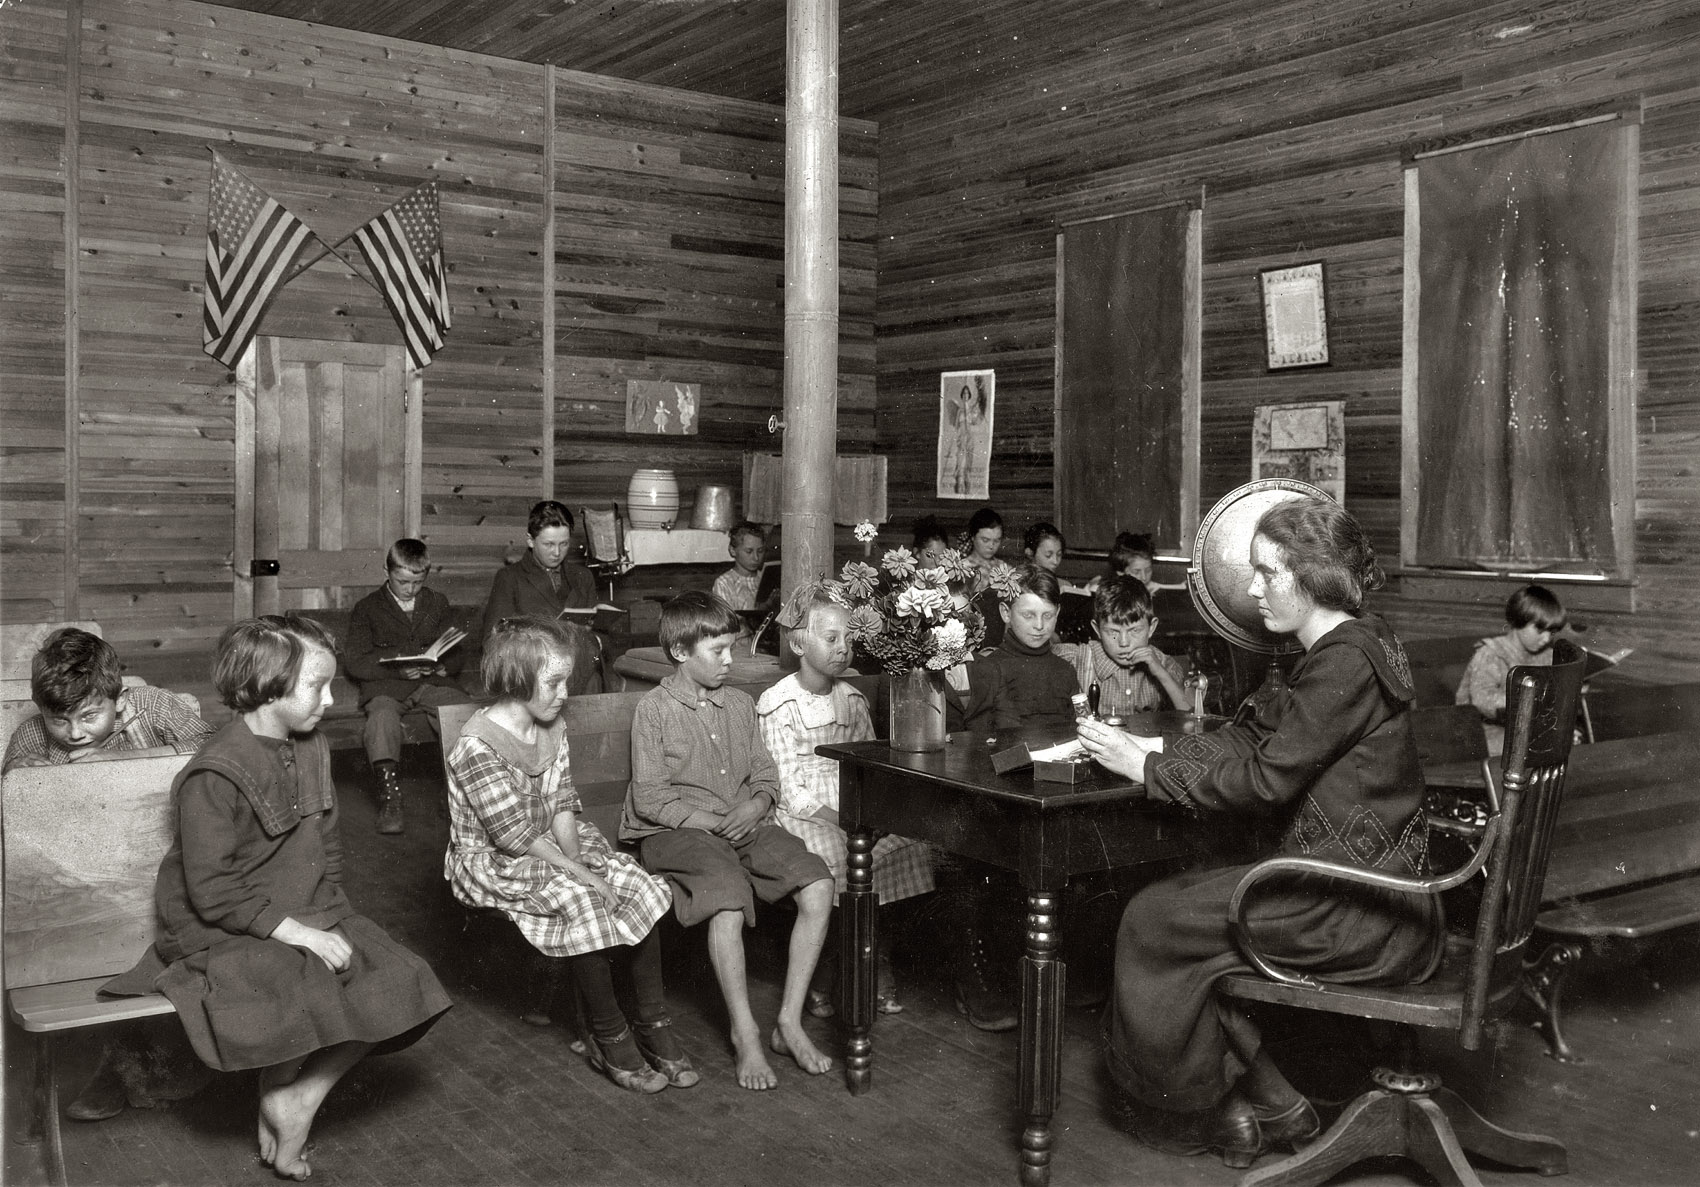 October 7, 1921. "School in Session. Sunset School, Marey, West Virginia. Pocahontas County." View full size. Photograph by Lewis Wickes Hine.